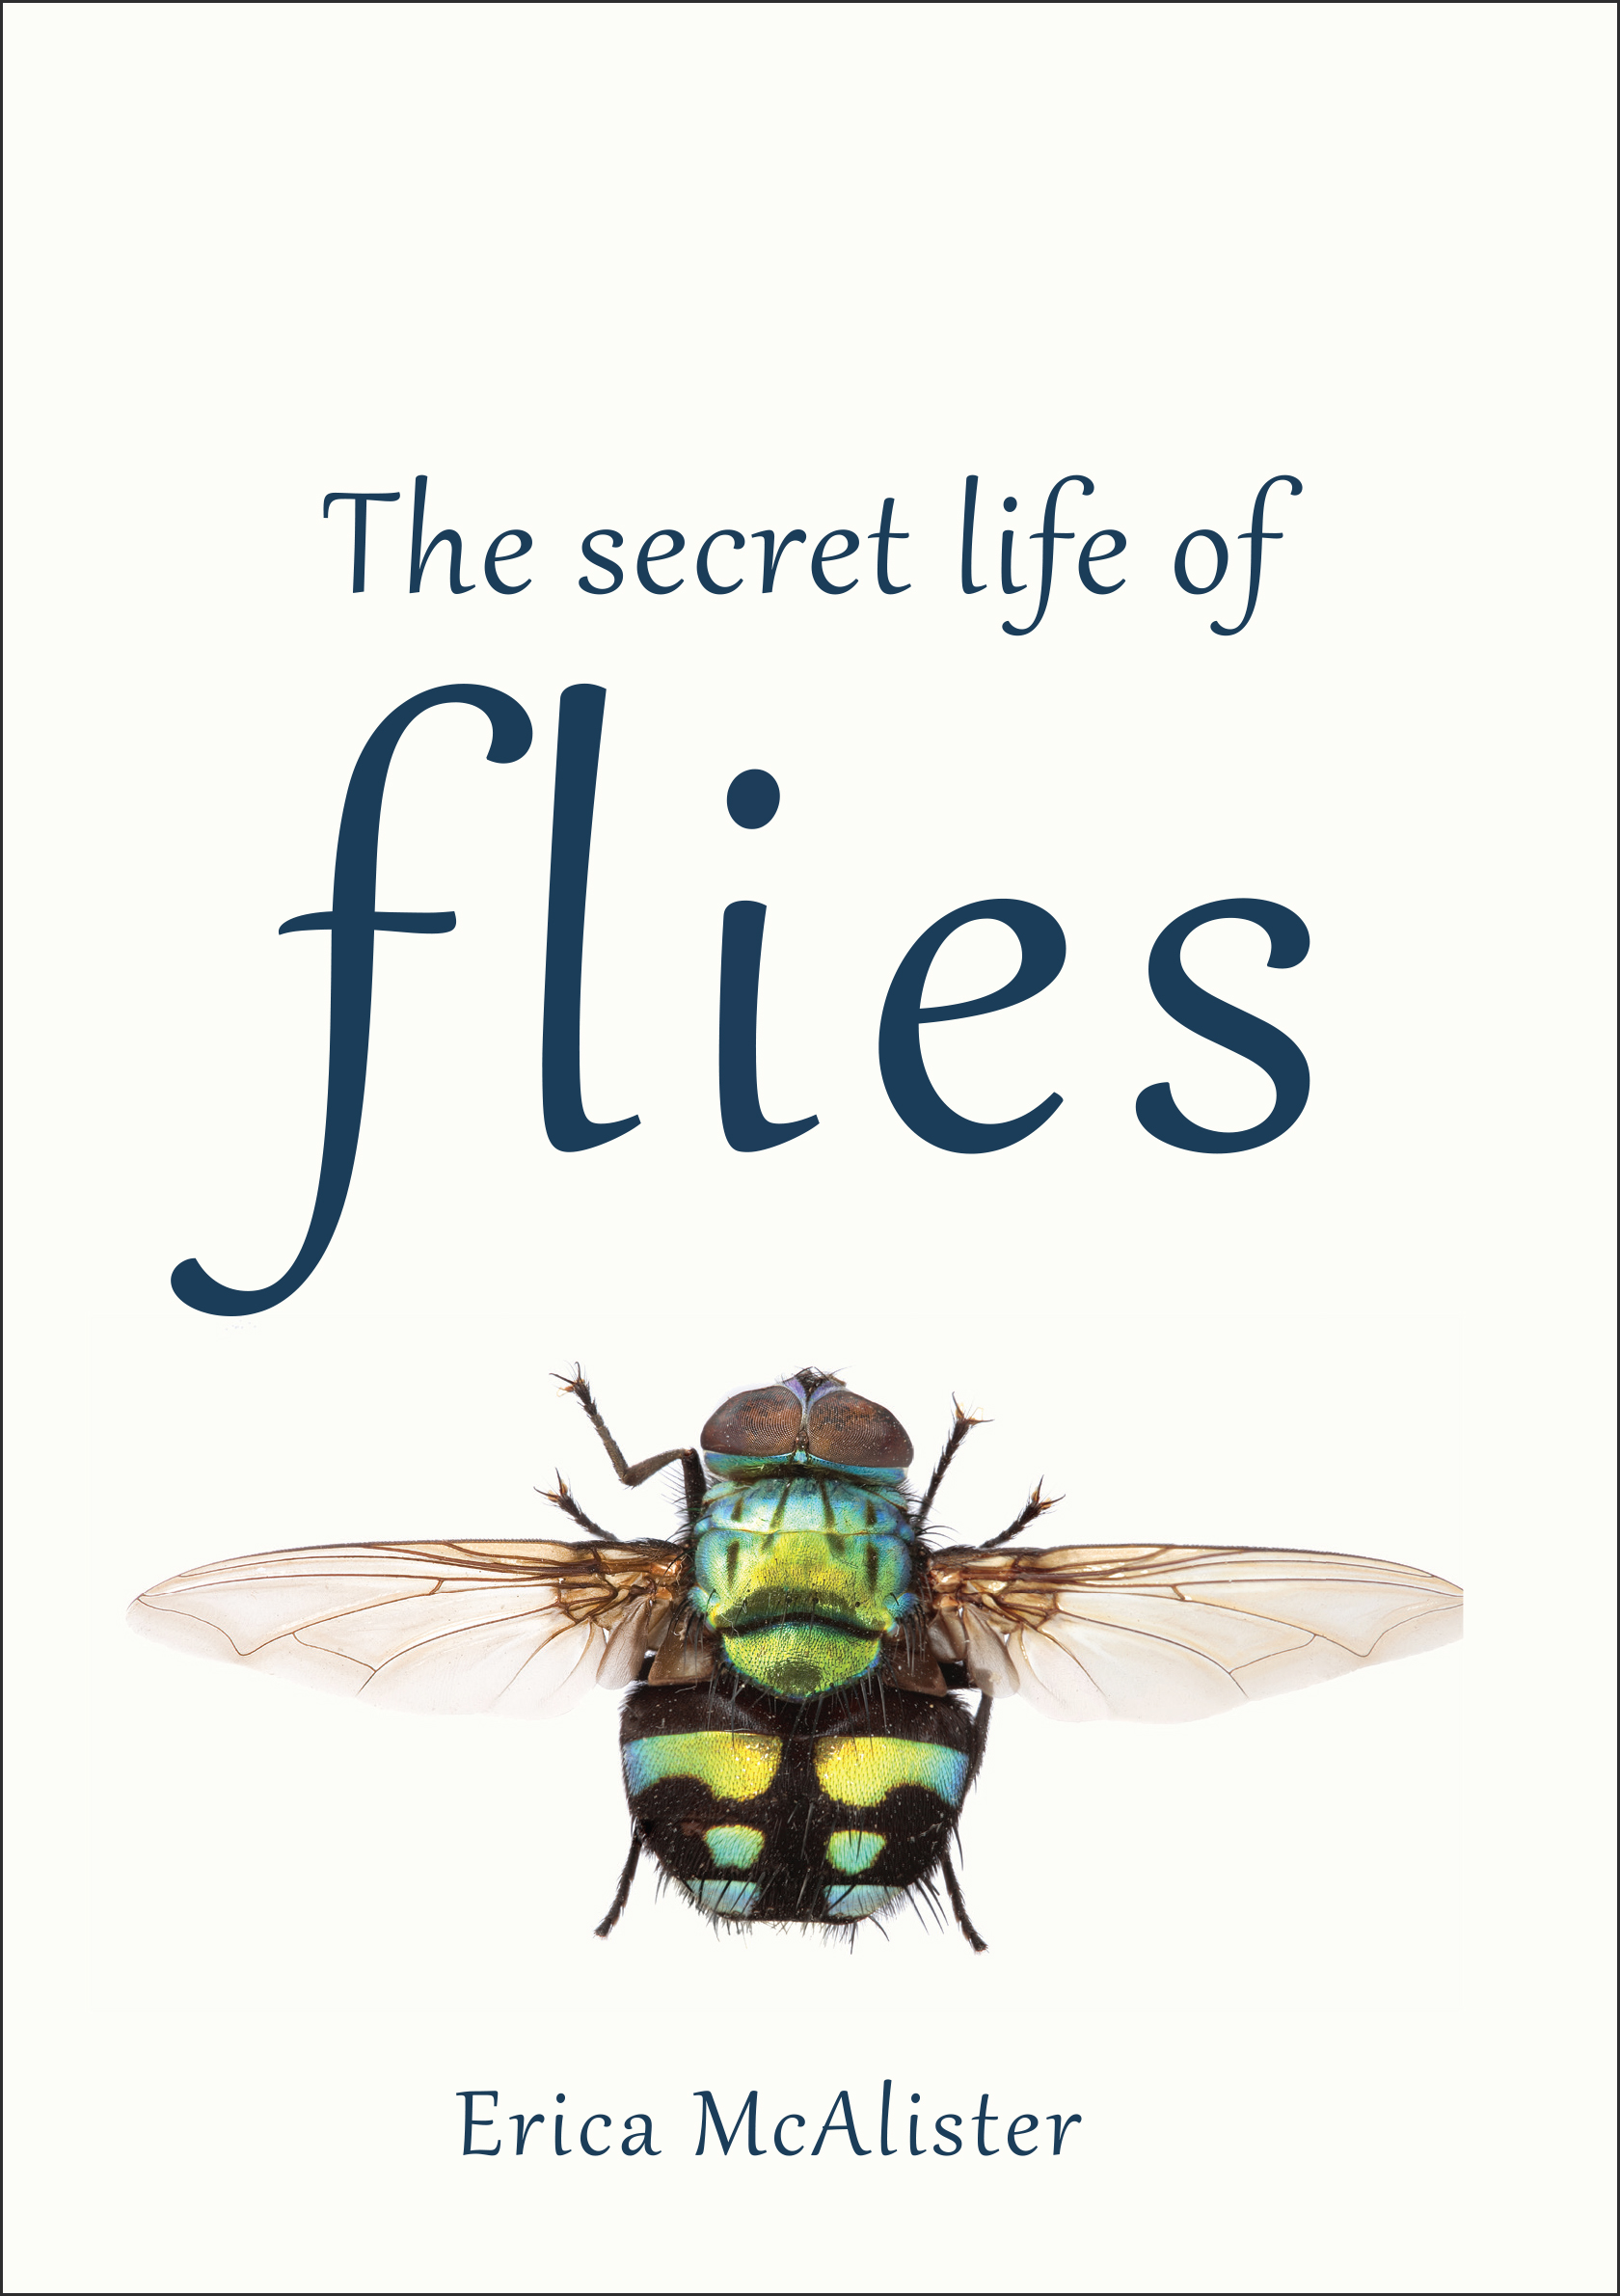 Cover featuring large green and gold fly on a cream background.